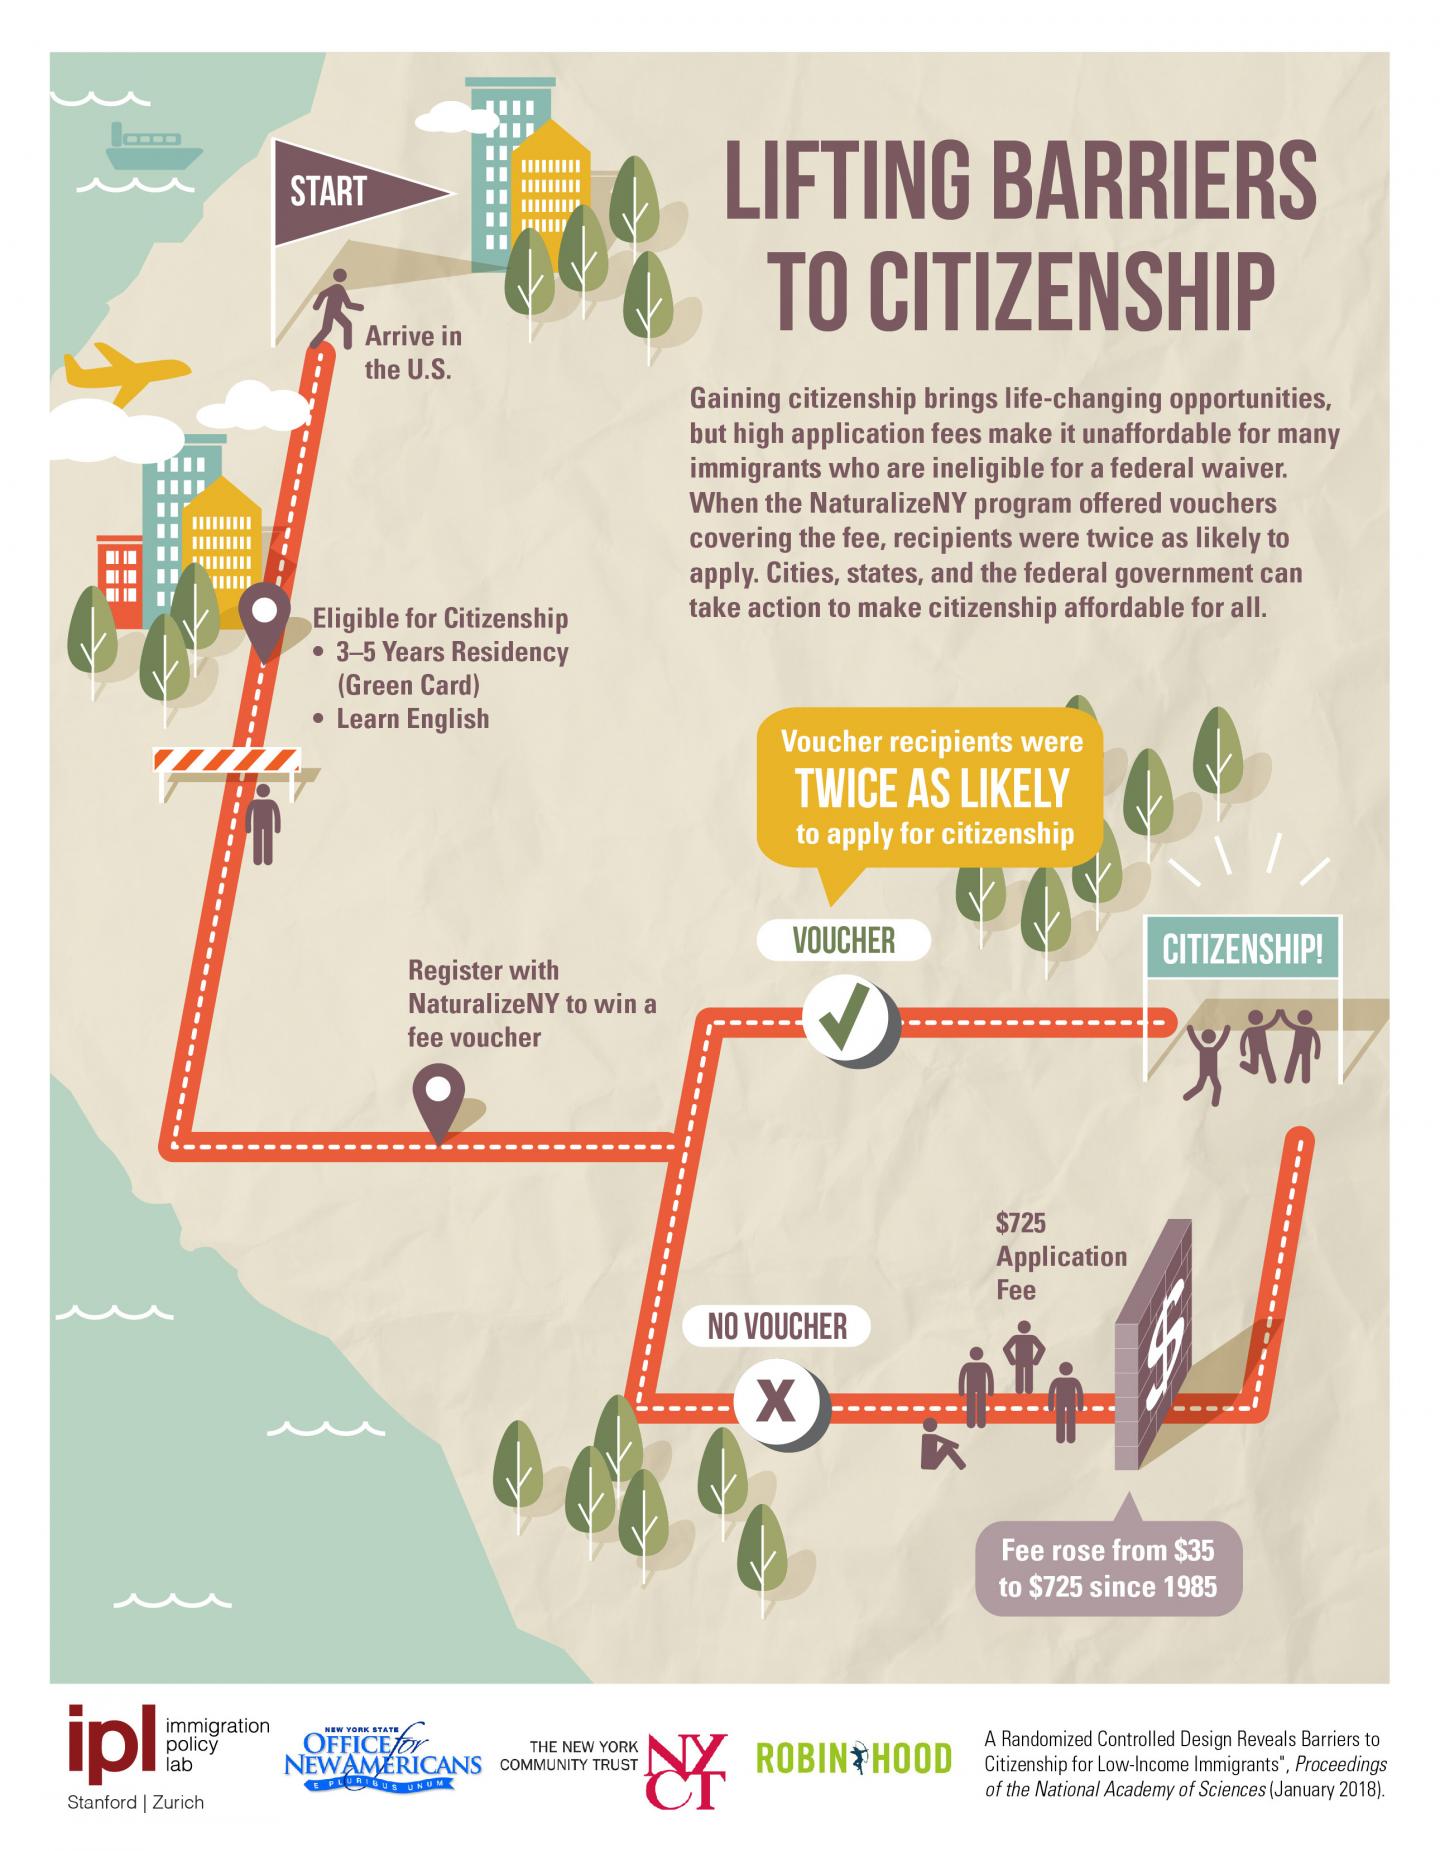 Lifting Barriers to Citizenship